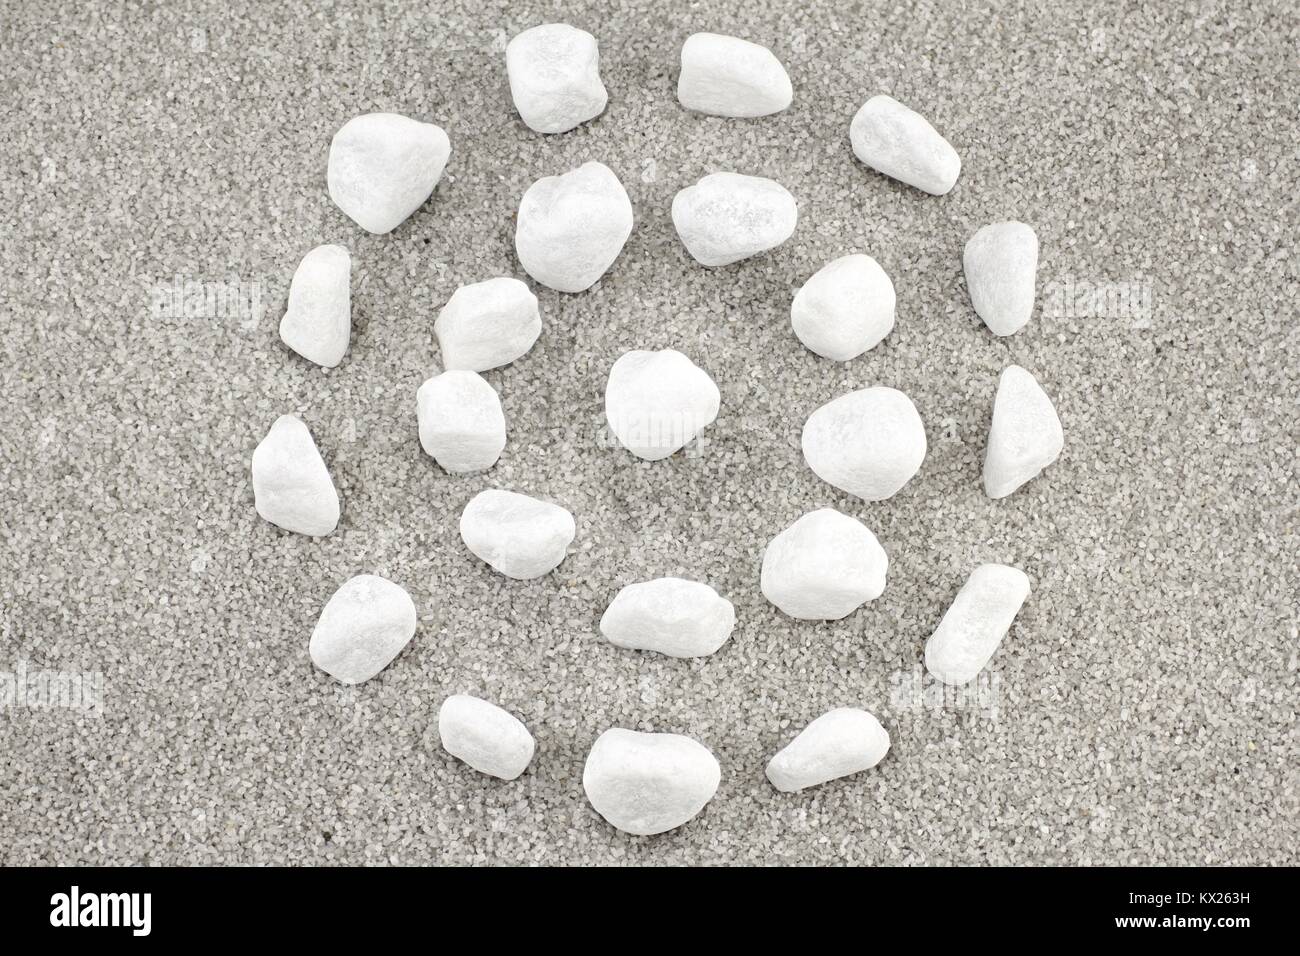 White pebbles in circular shape on gray sand Stock Photo